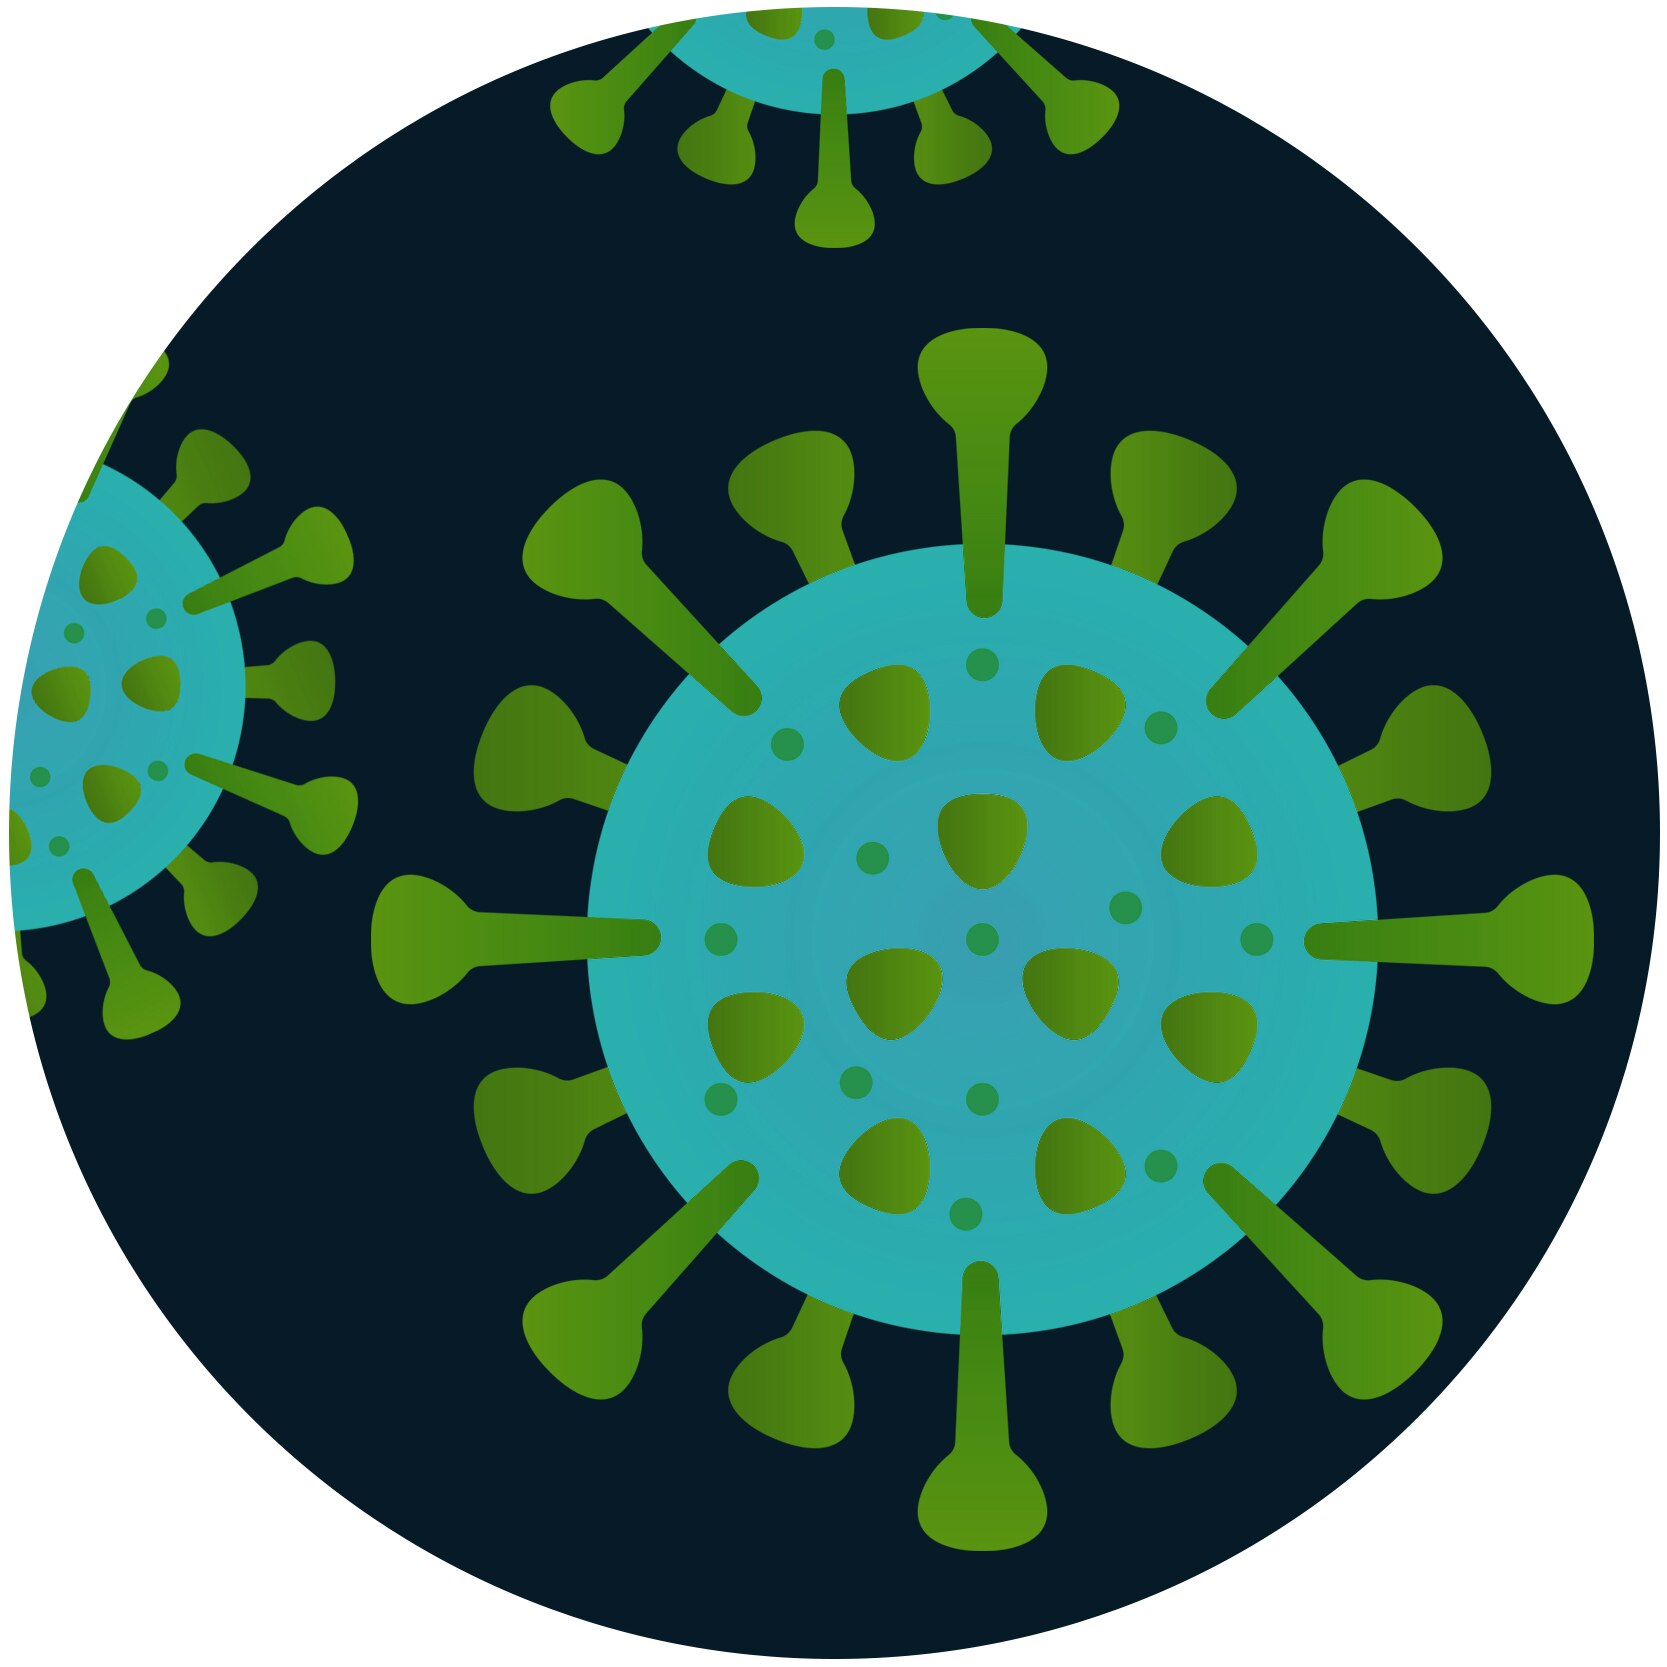 A graphic representation of the SARS-COV virus, which causes SARS